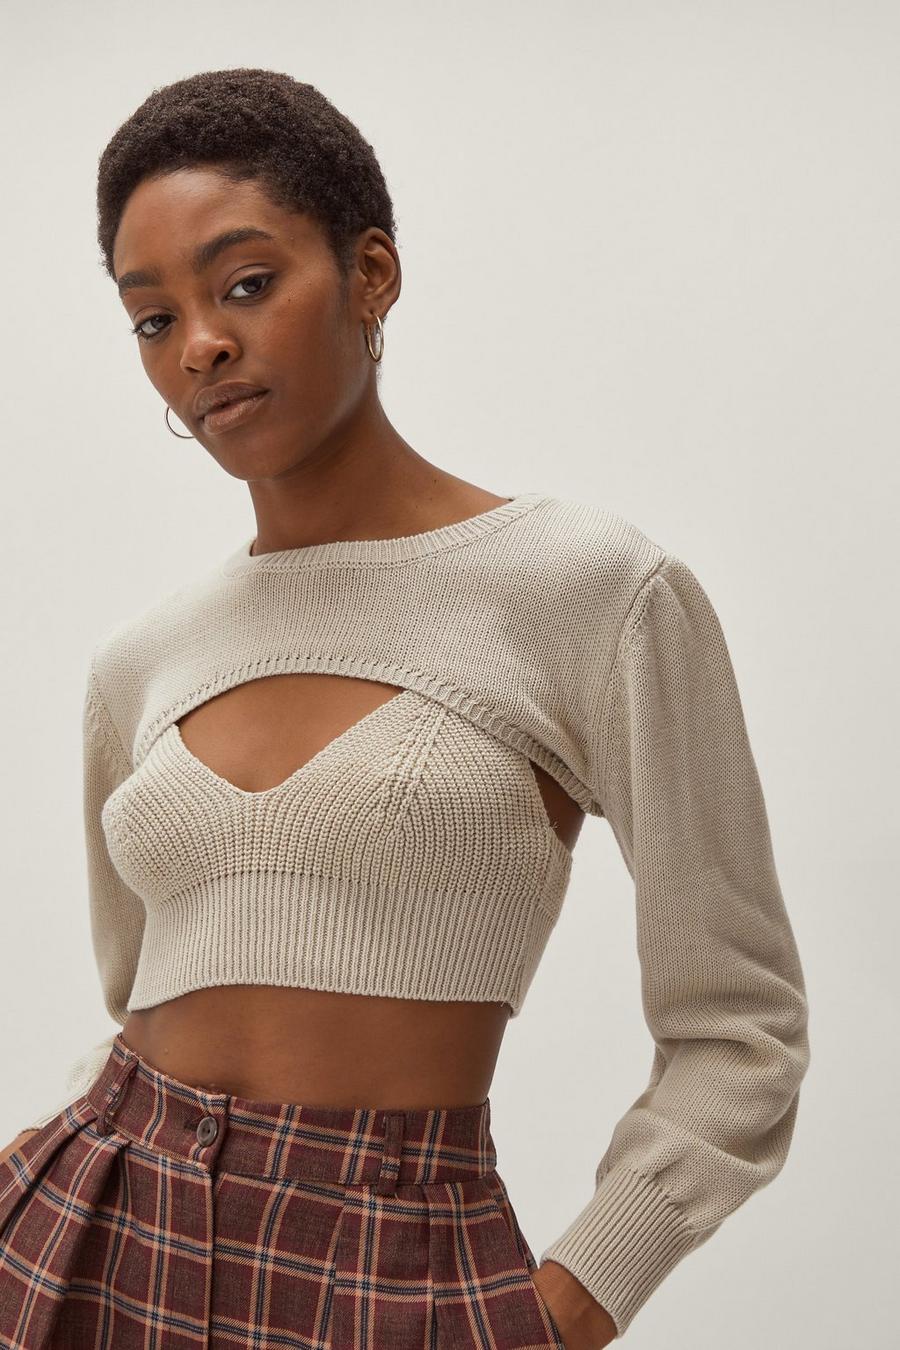 Longline Bralette and Super Cropped Sweater Set